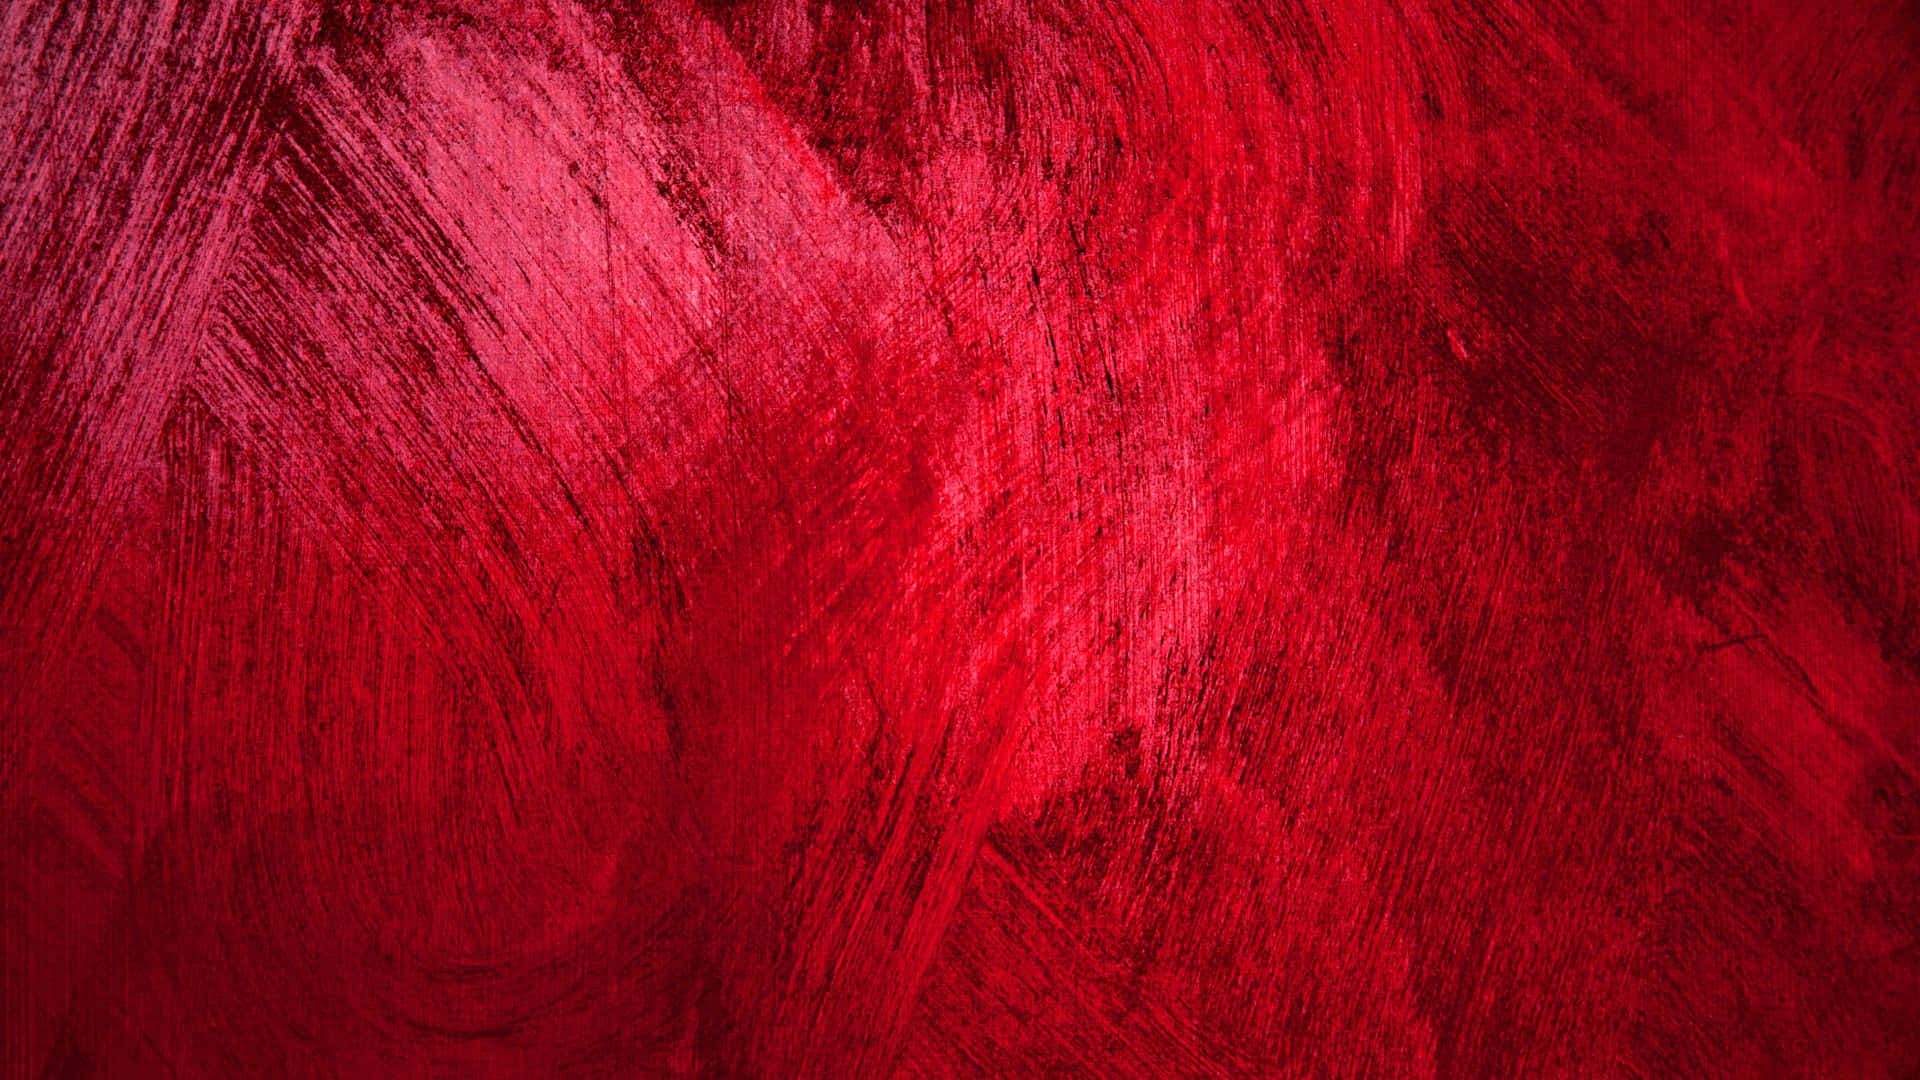 Red Texture Paintbrush Background